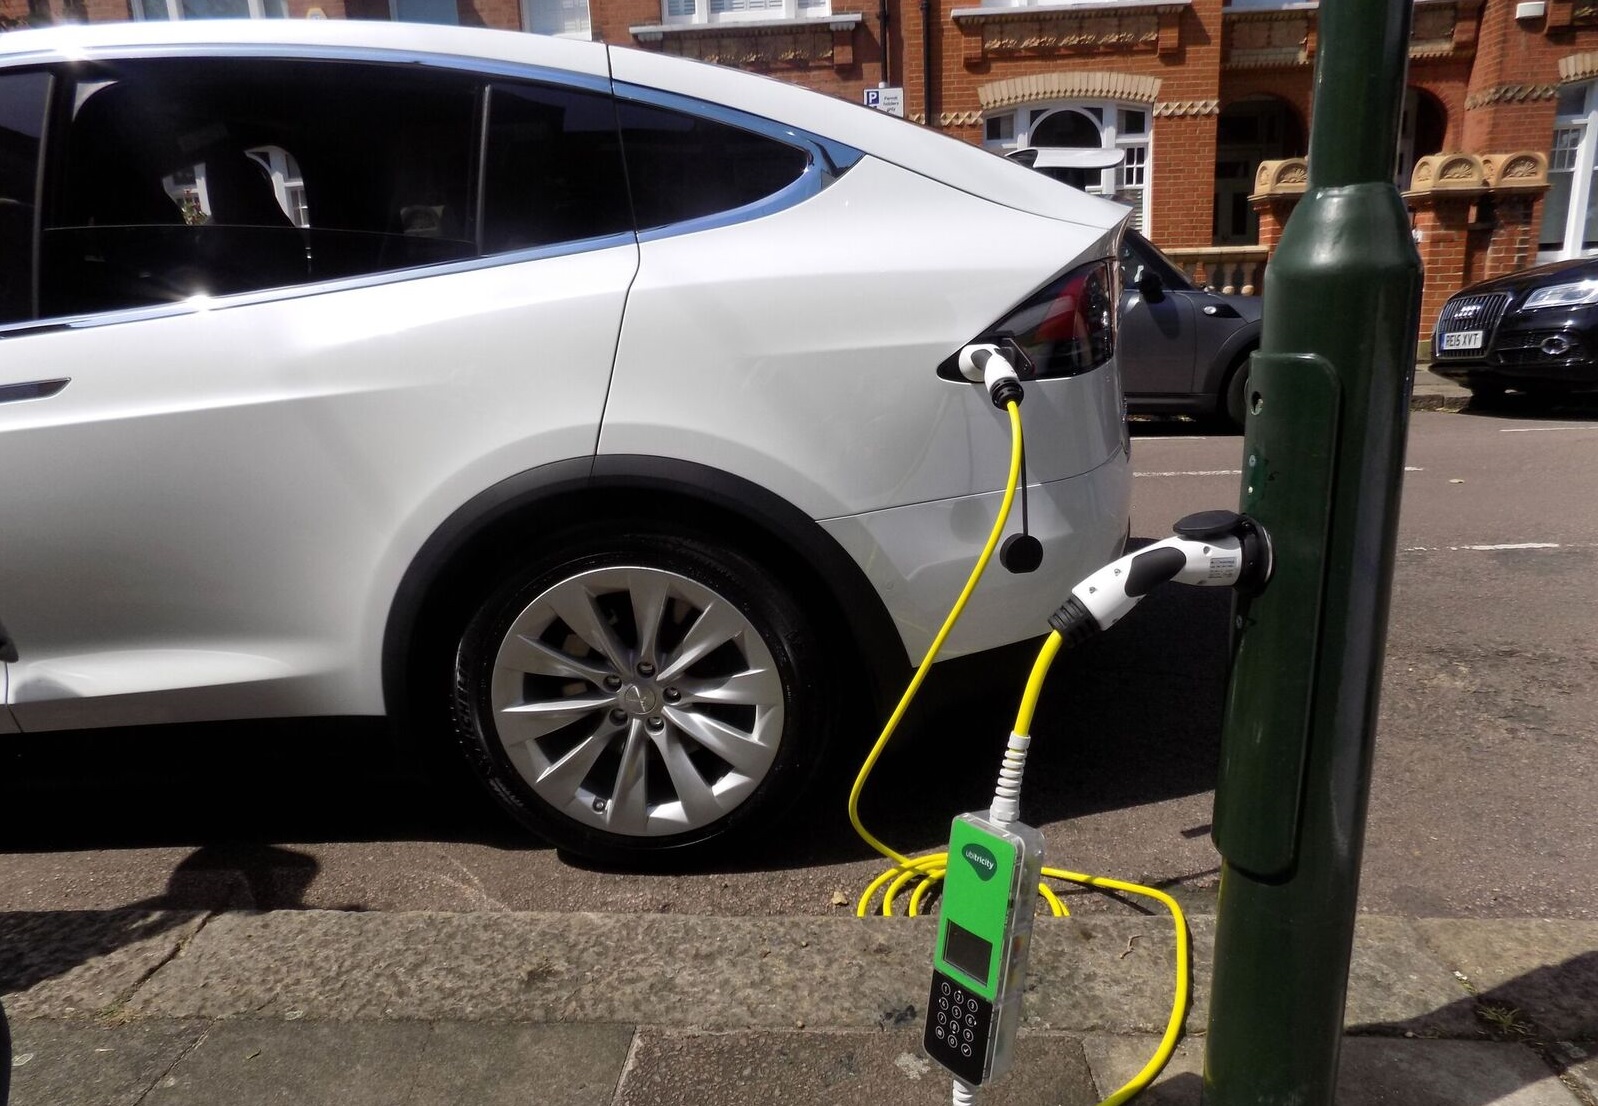 London's lampposts turned into electric car chargers could solve city's pollution problem